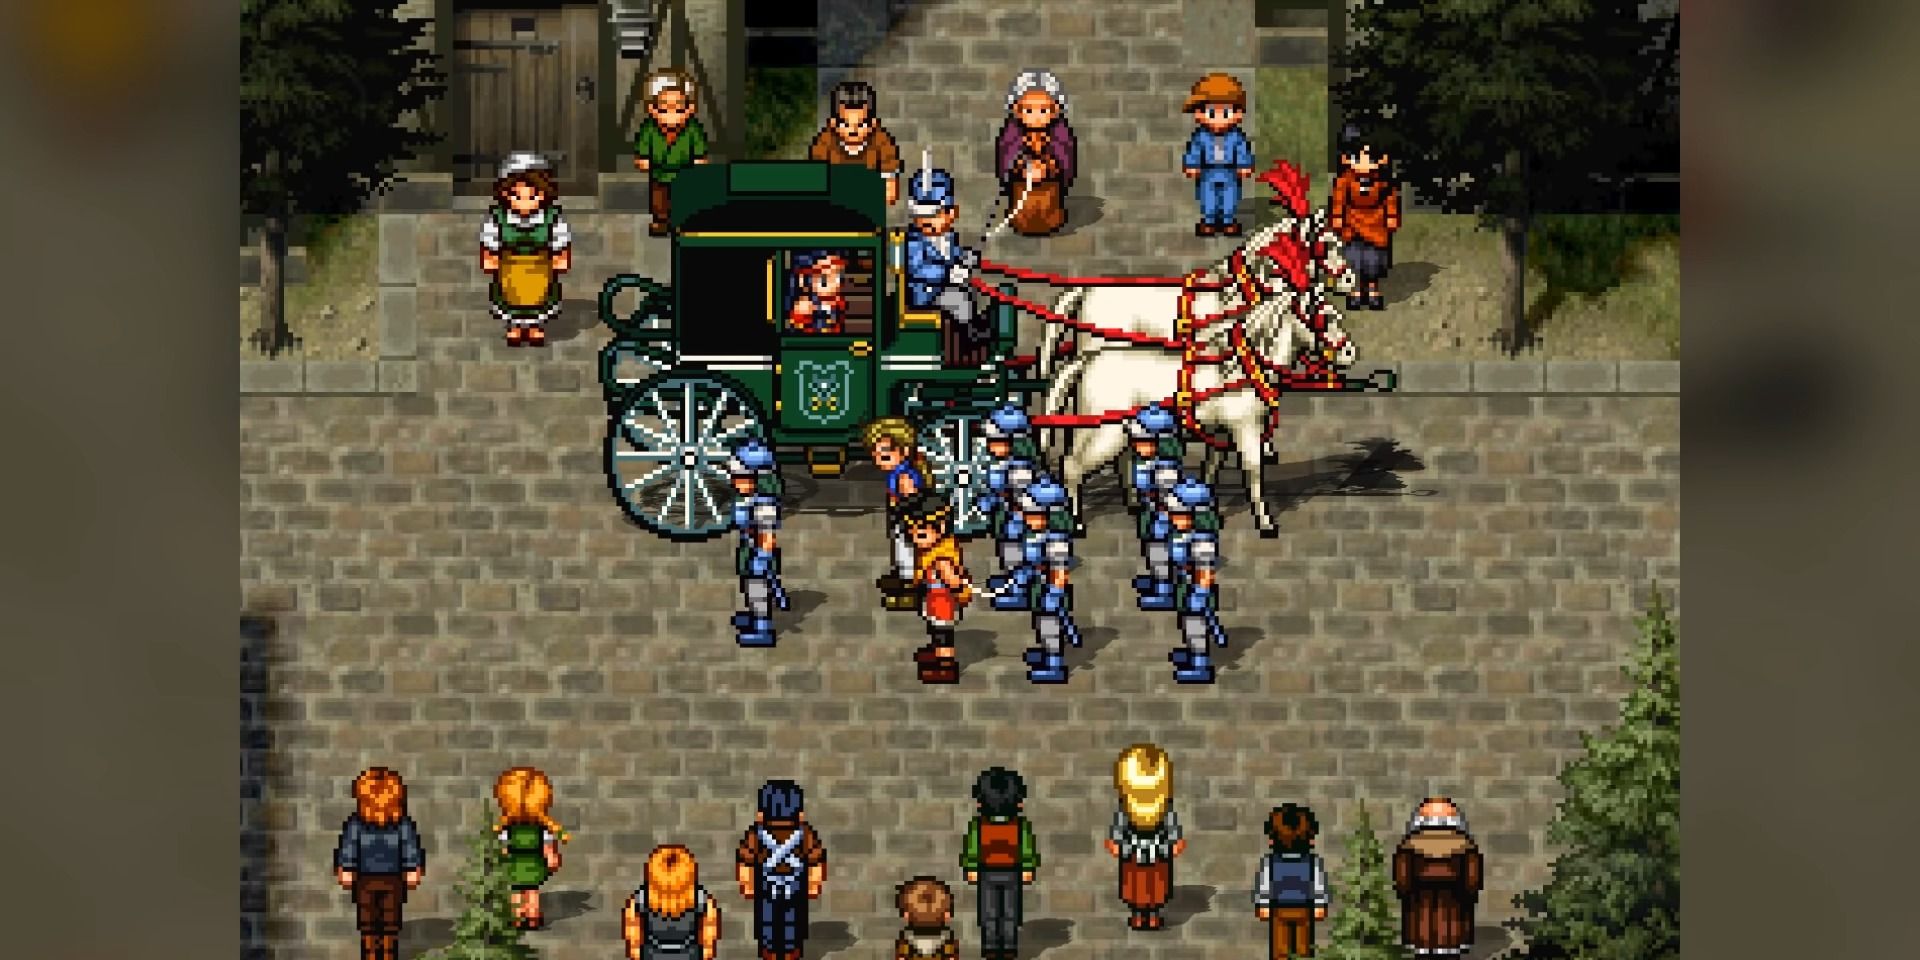 A screenshot showing a scene in Suikoden 2